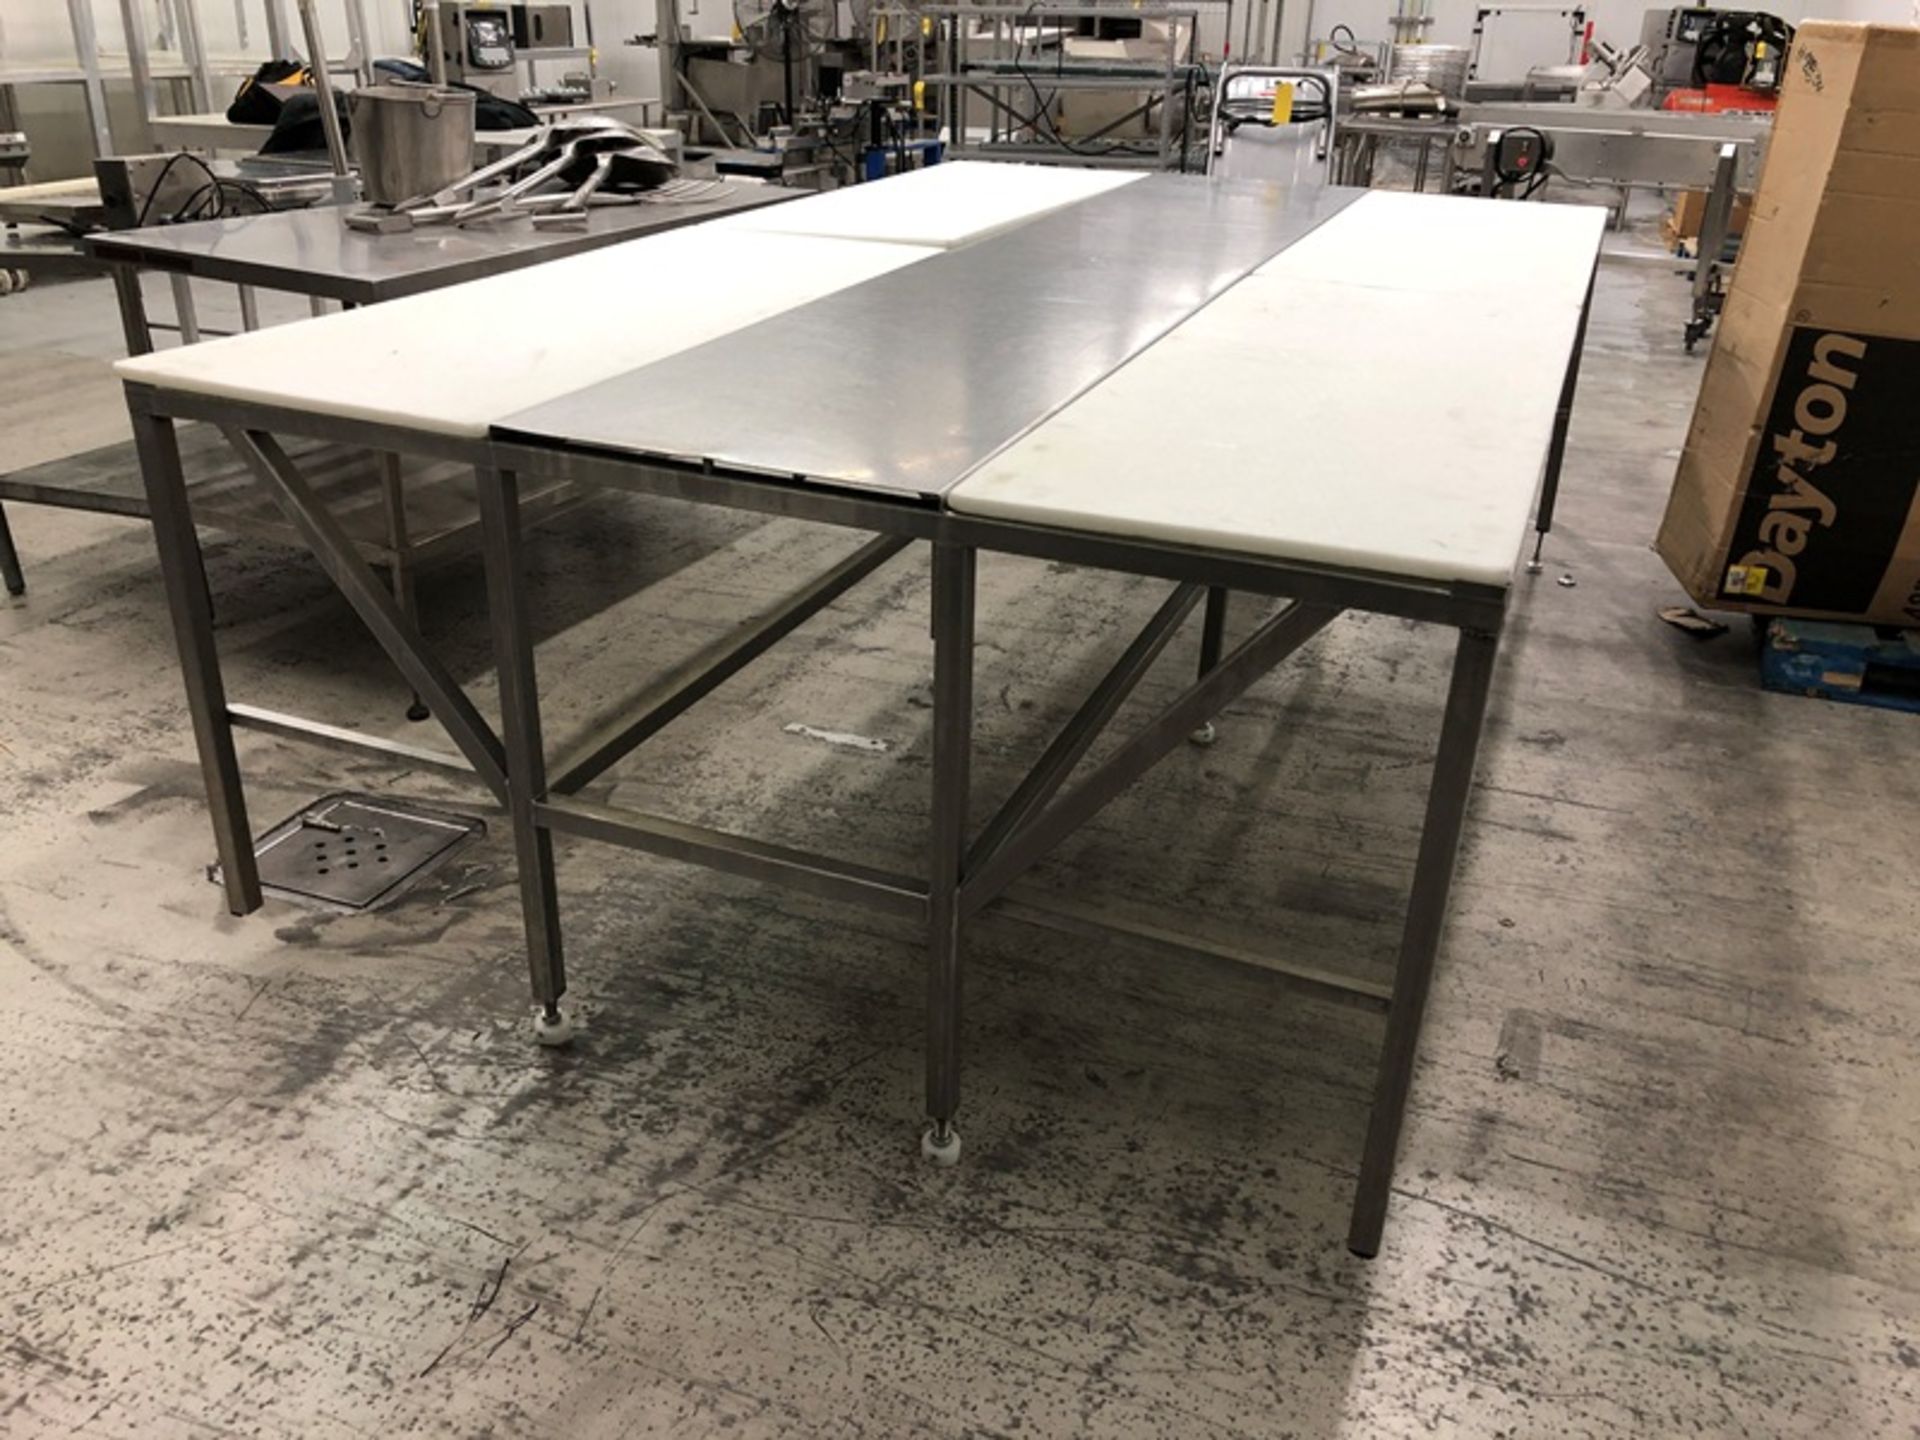 Trim Table, 10'x6'x40", (4) 5'x24" Cutting boards on each side, 10'x24" center, stainless steel - Image 2 of 2